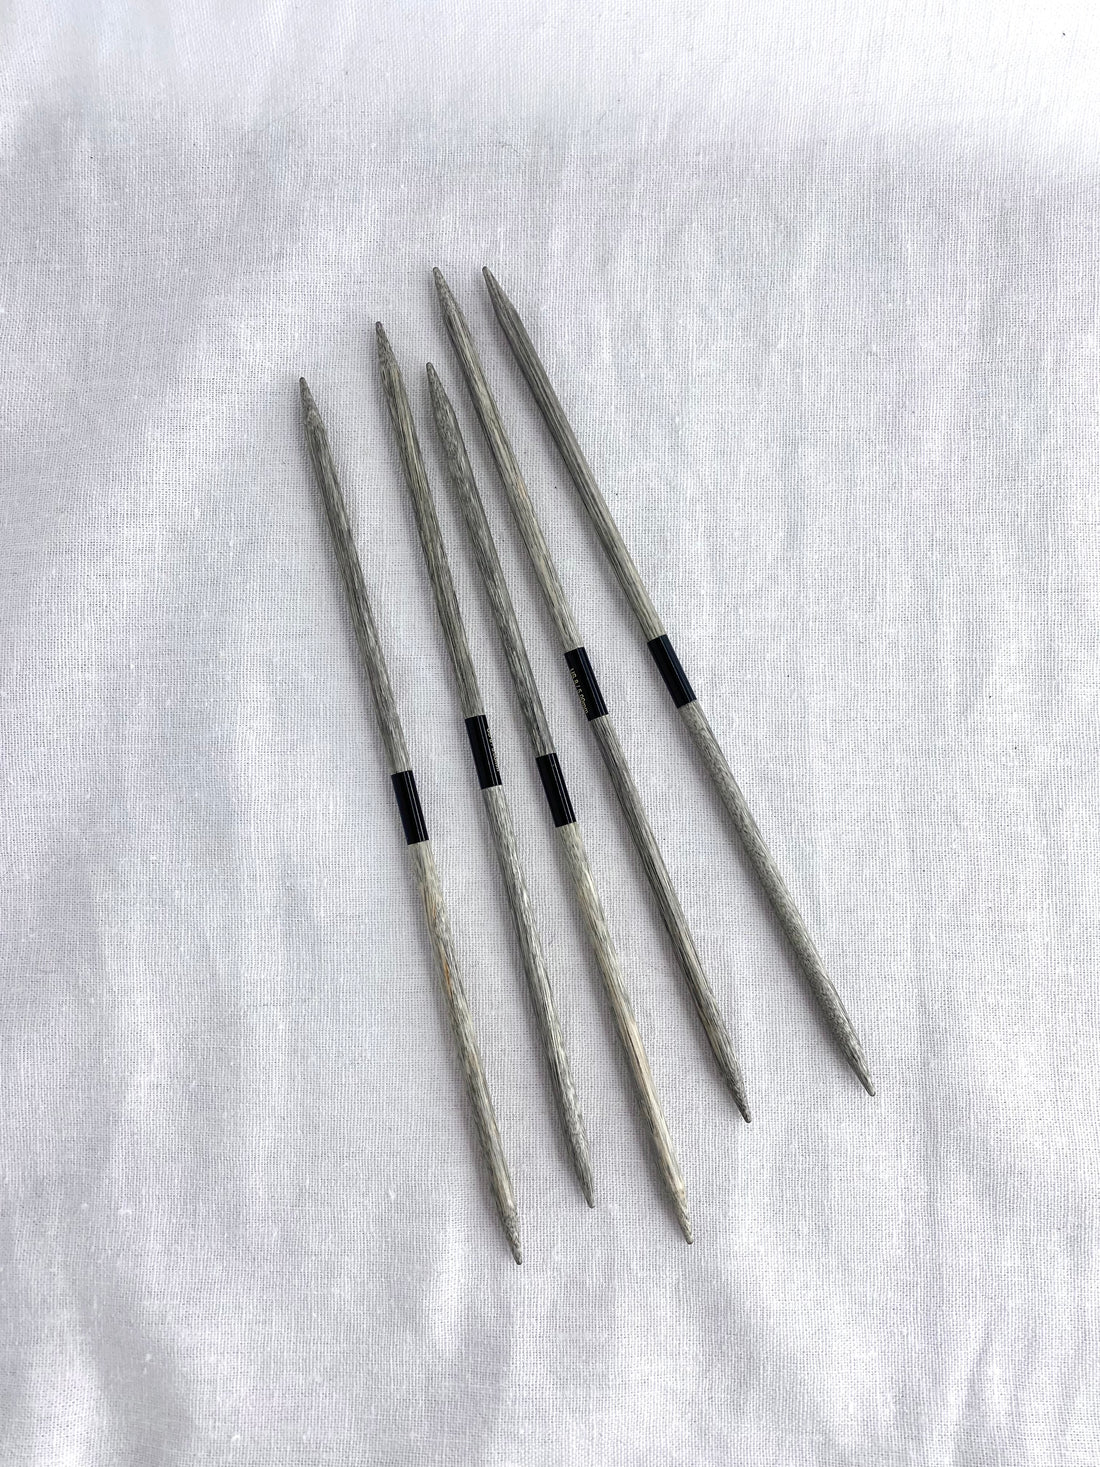 Driftwood Double-Pointed Needles | Lykke